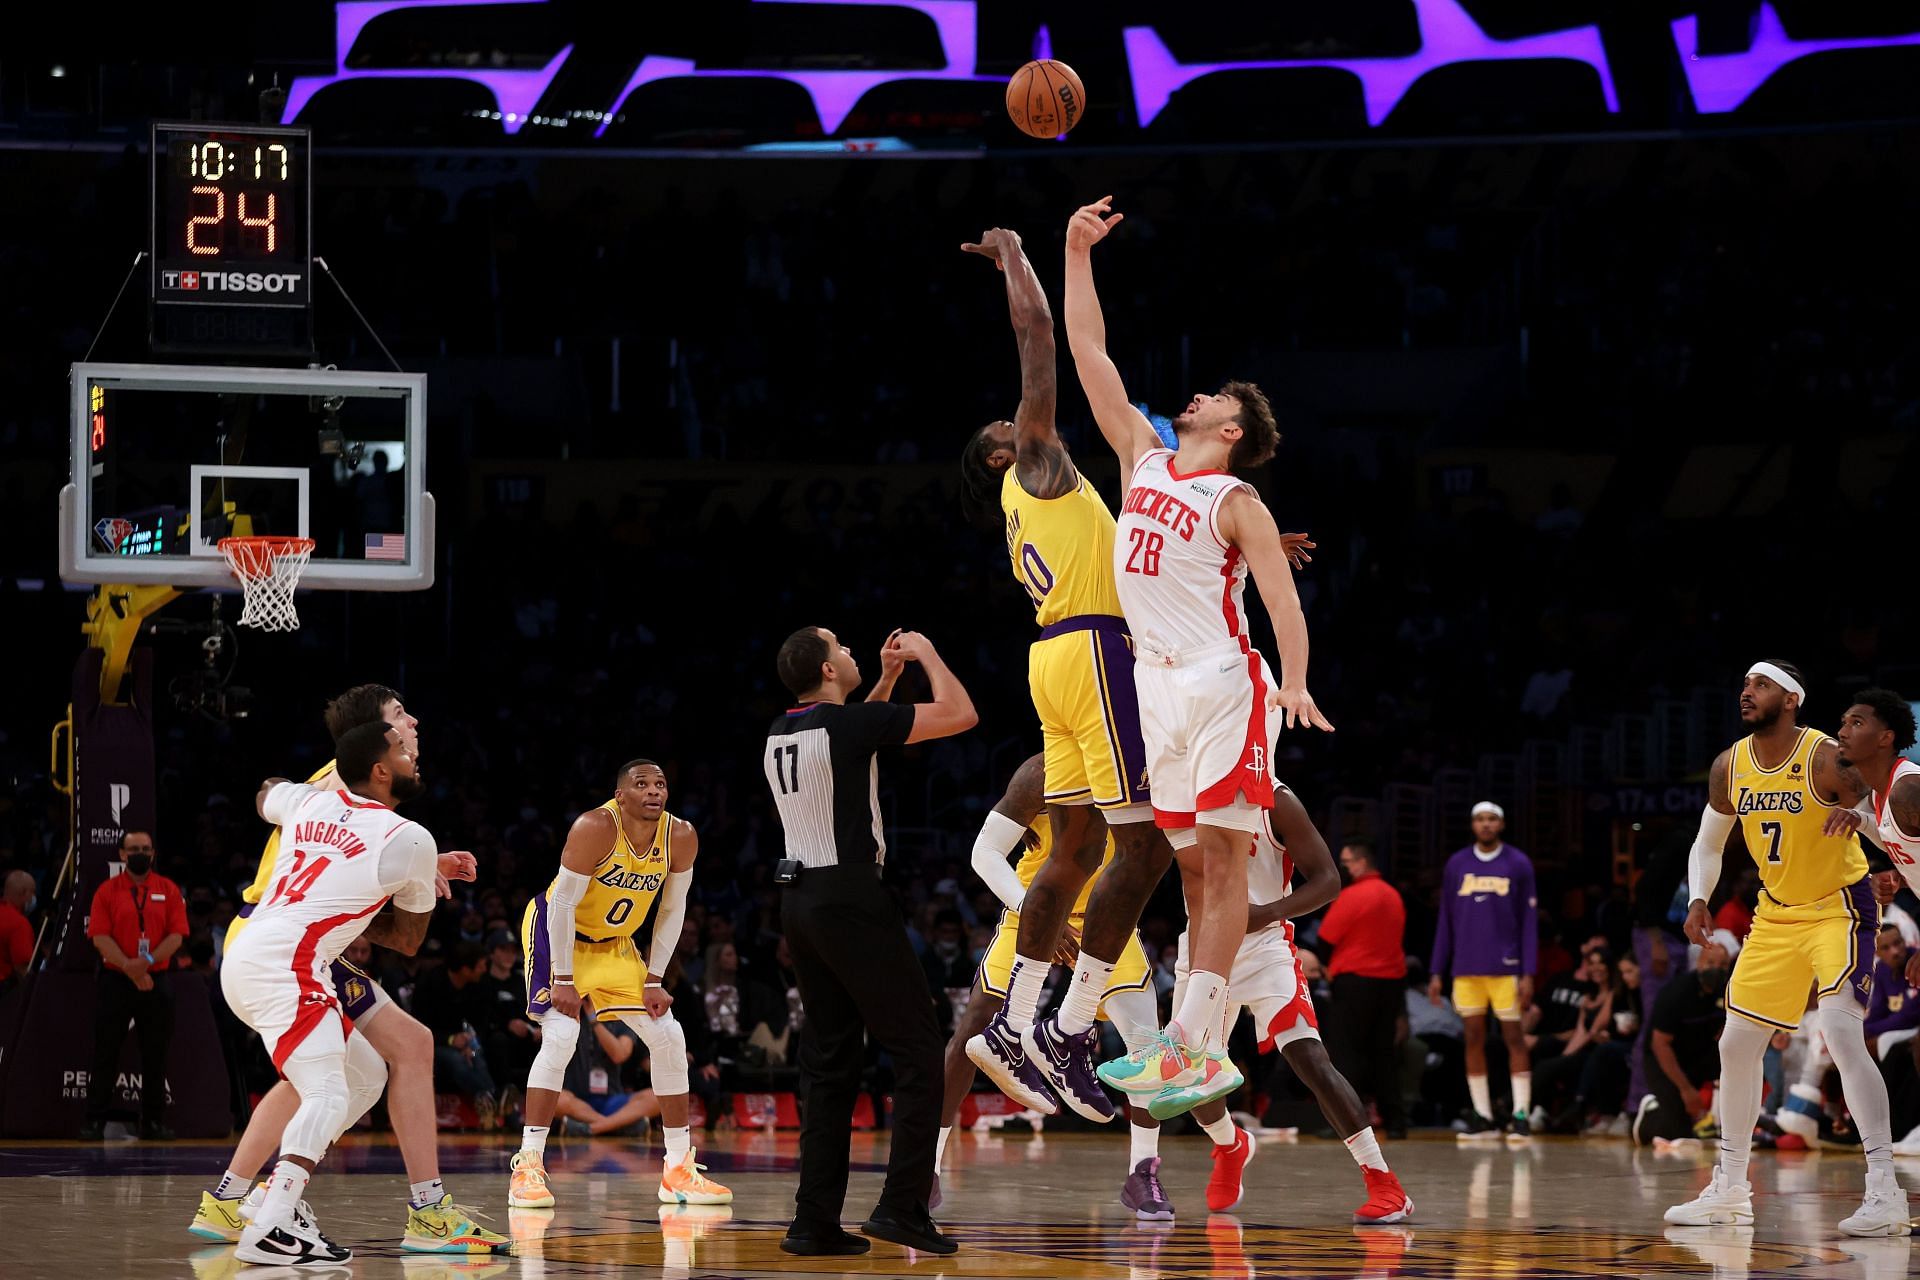 The LA Lakers pulled off a 119-117 win against the Houston Rockets in their previous game